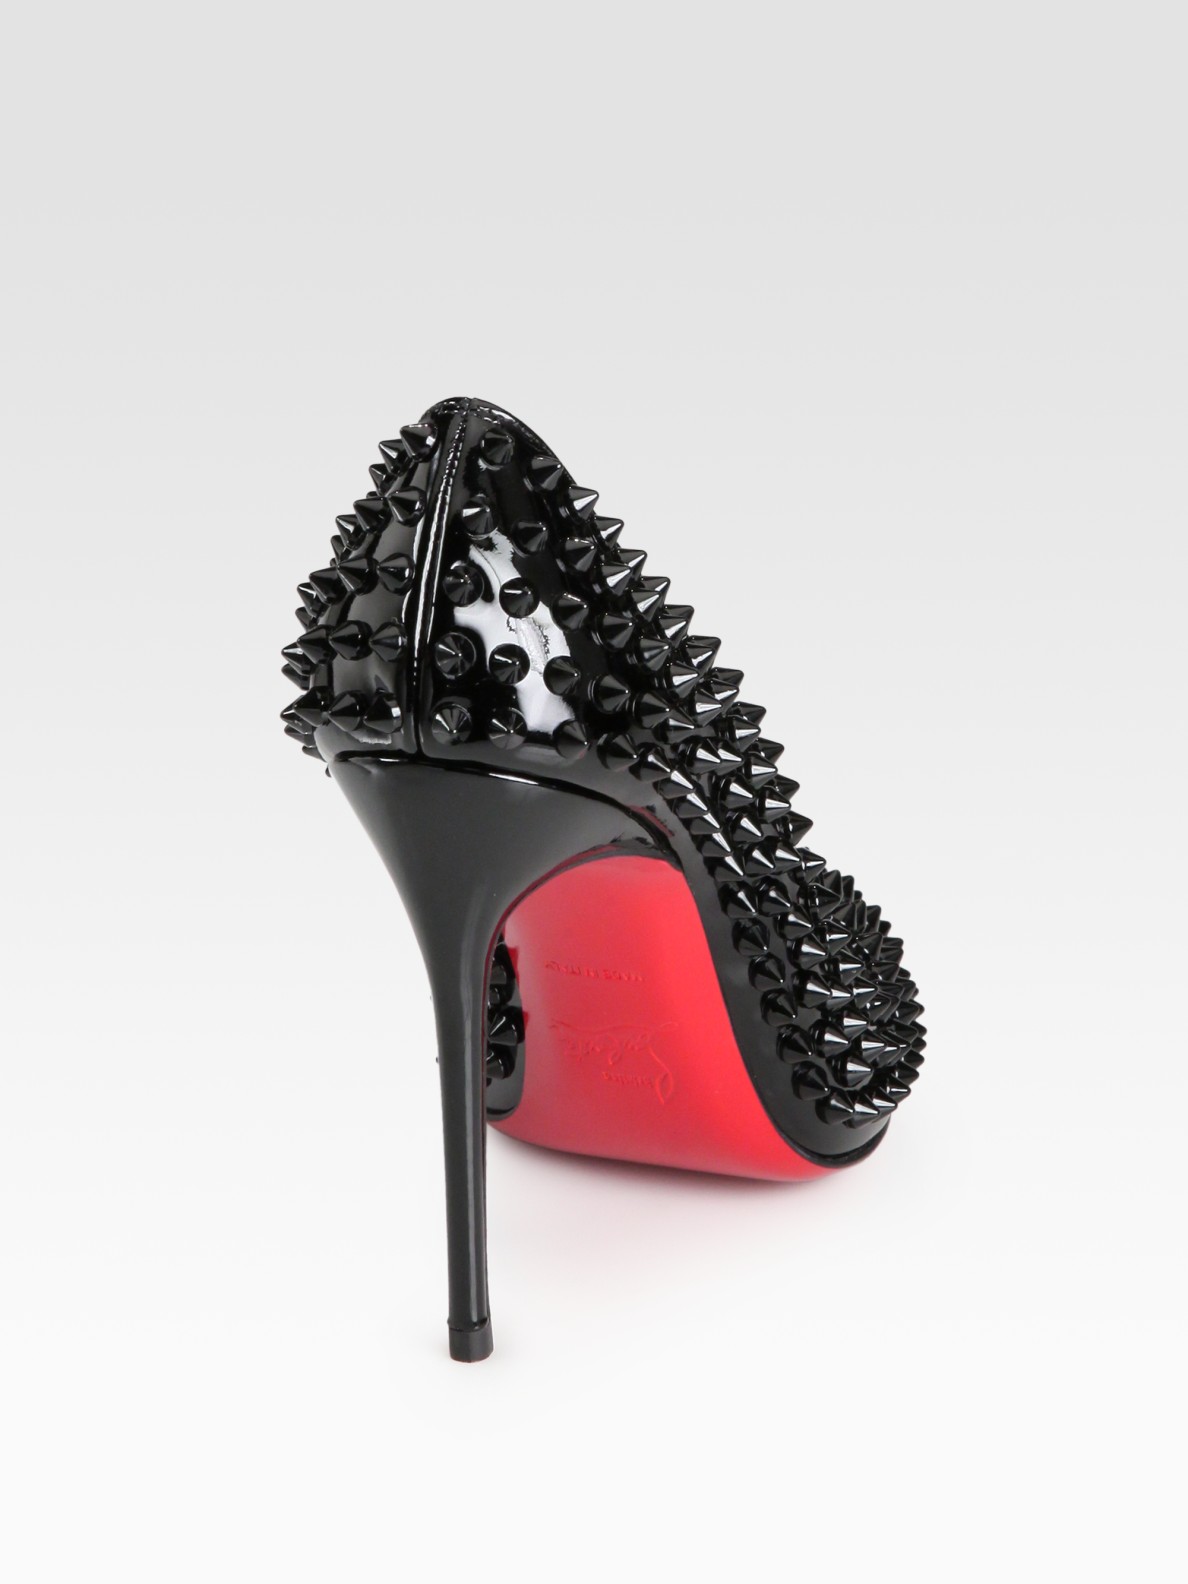 Christian louboutin Fifi Spiked Patent Leather Pumps in Black | Lyst  